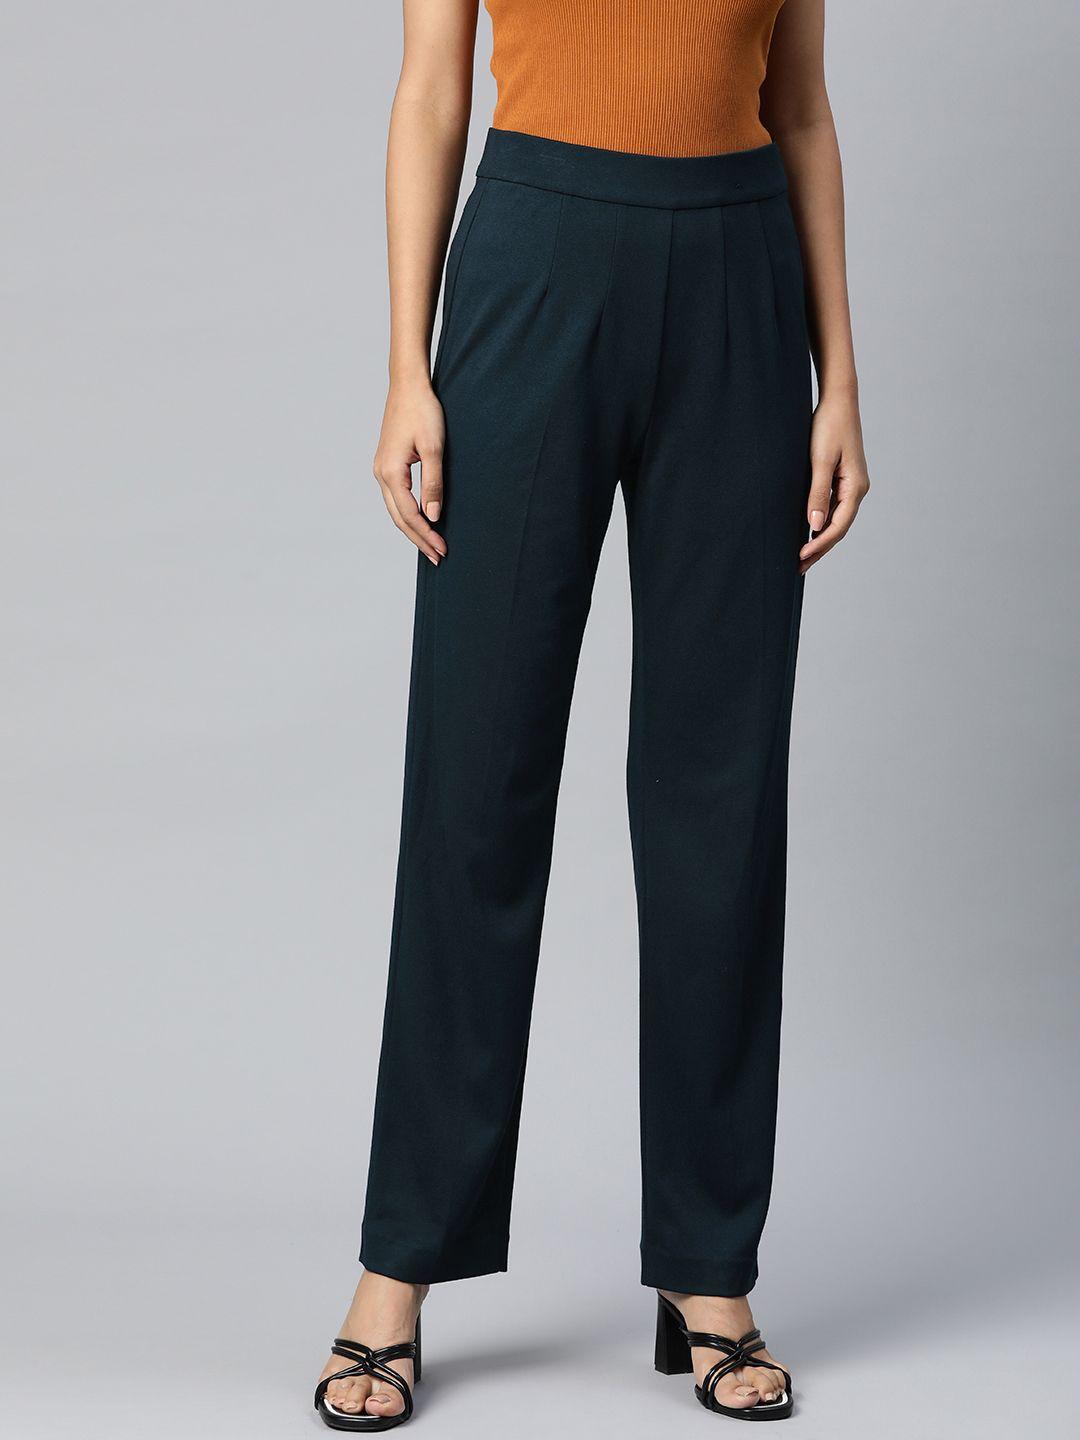 marks & spencer women navy blue straight fit pleated trousers